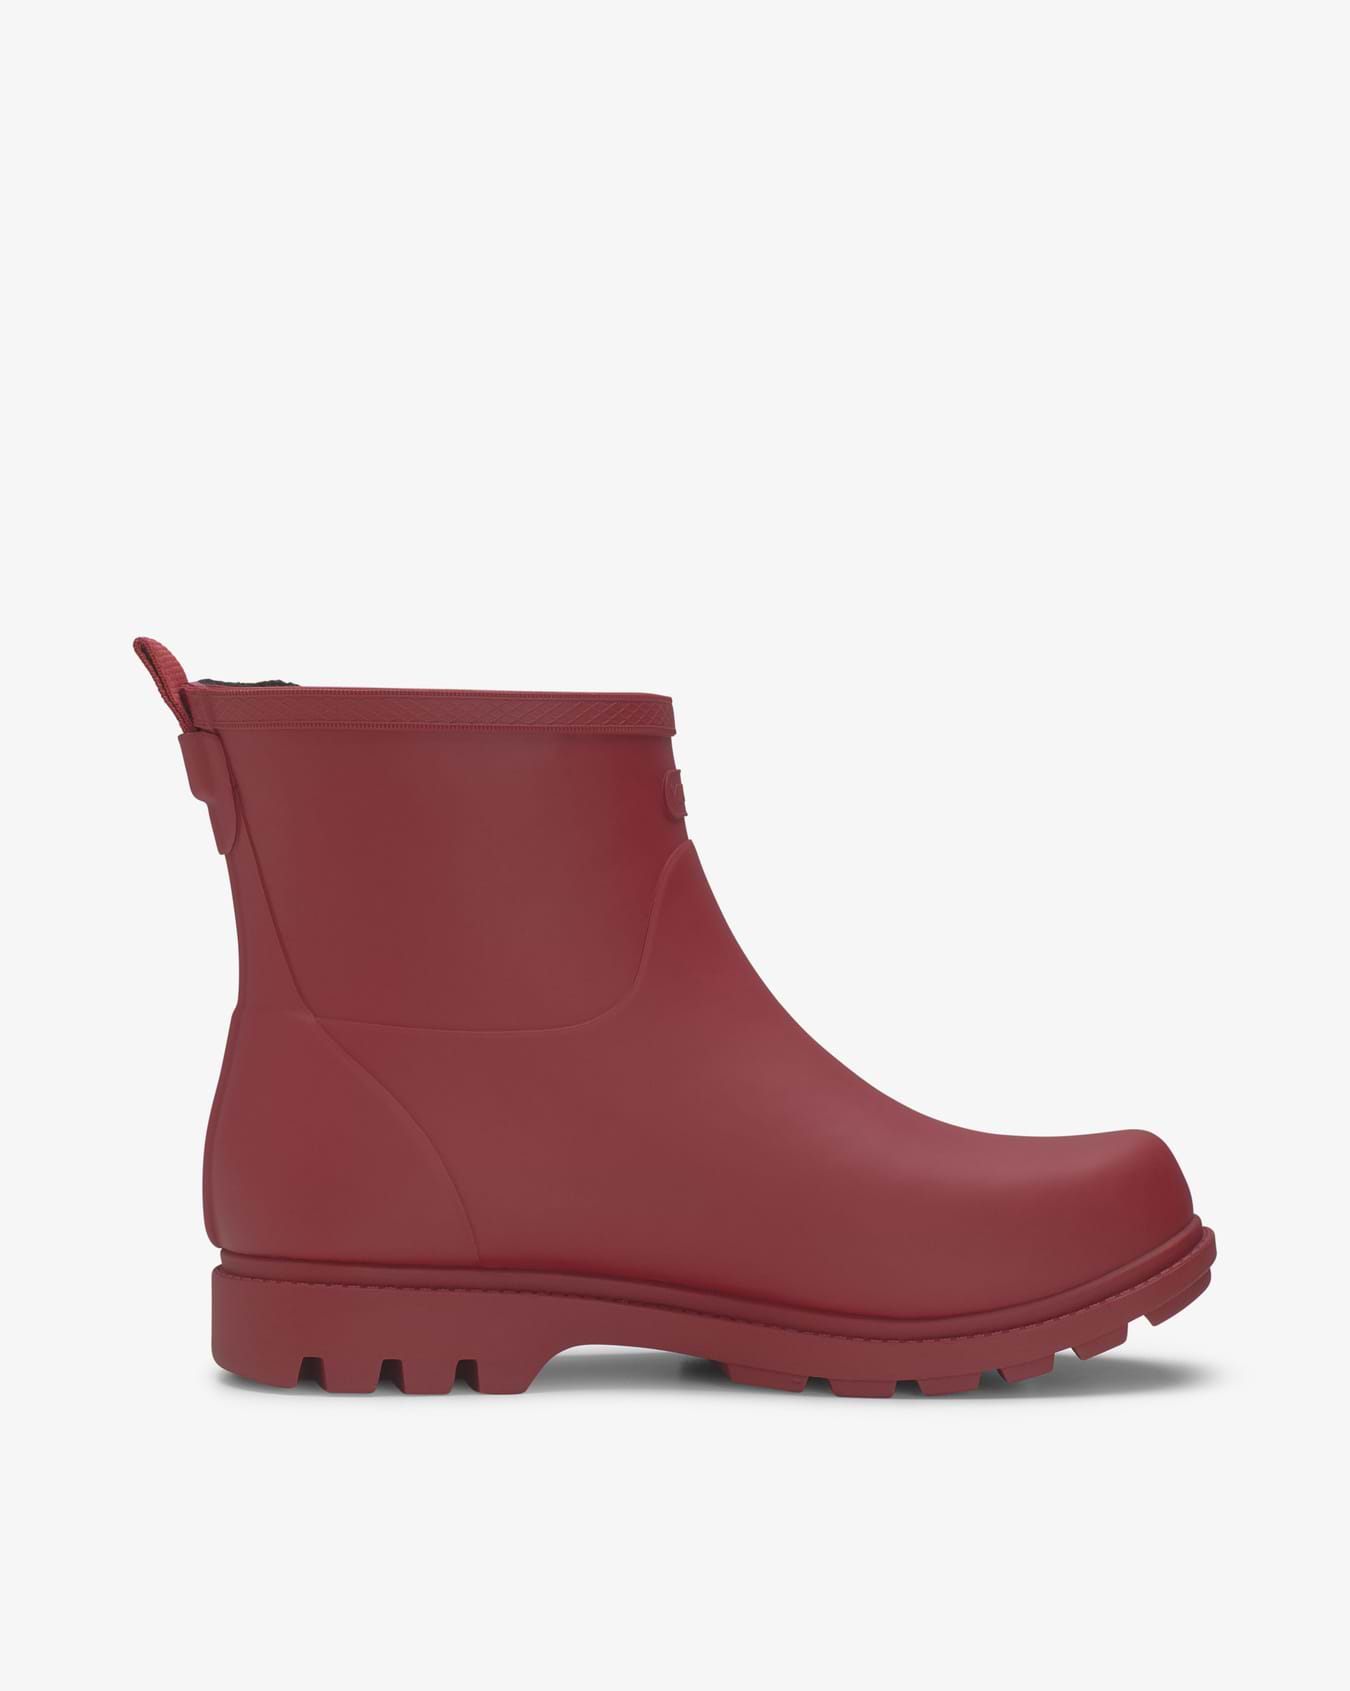 Viking Noble Warm Dark Red Rubber Boot